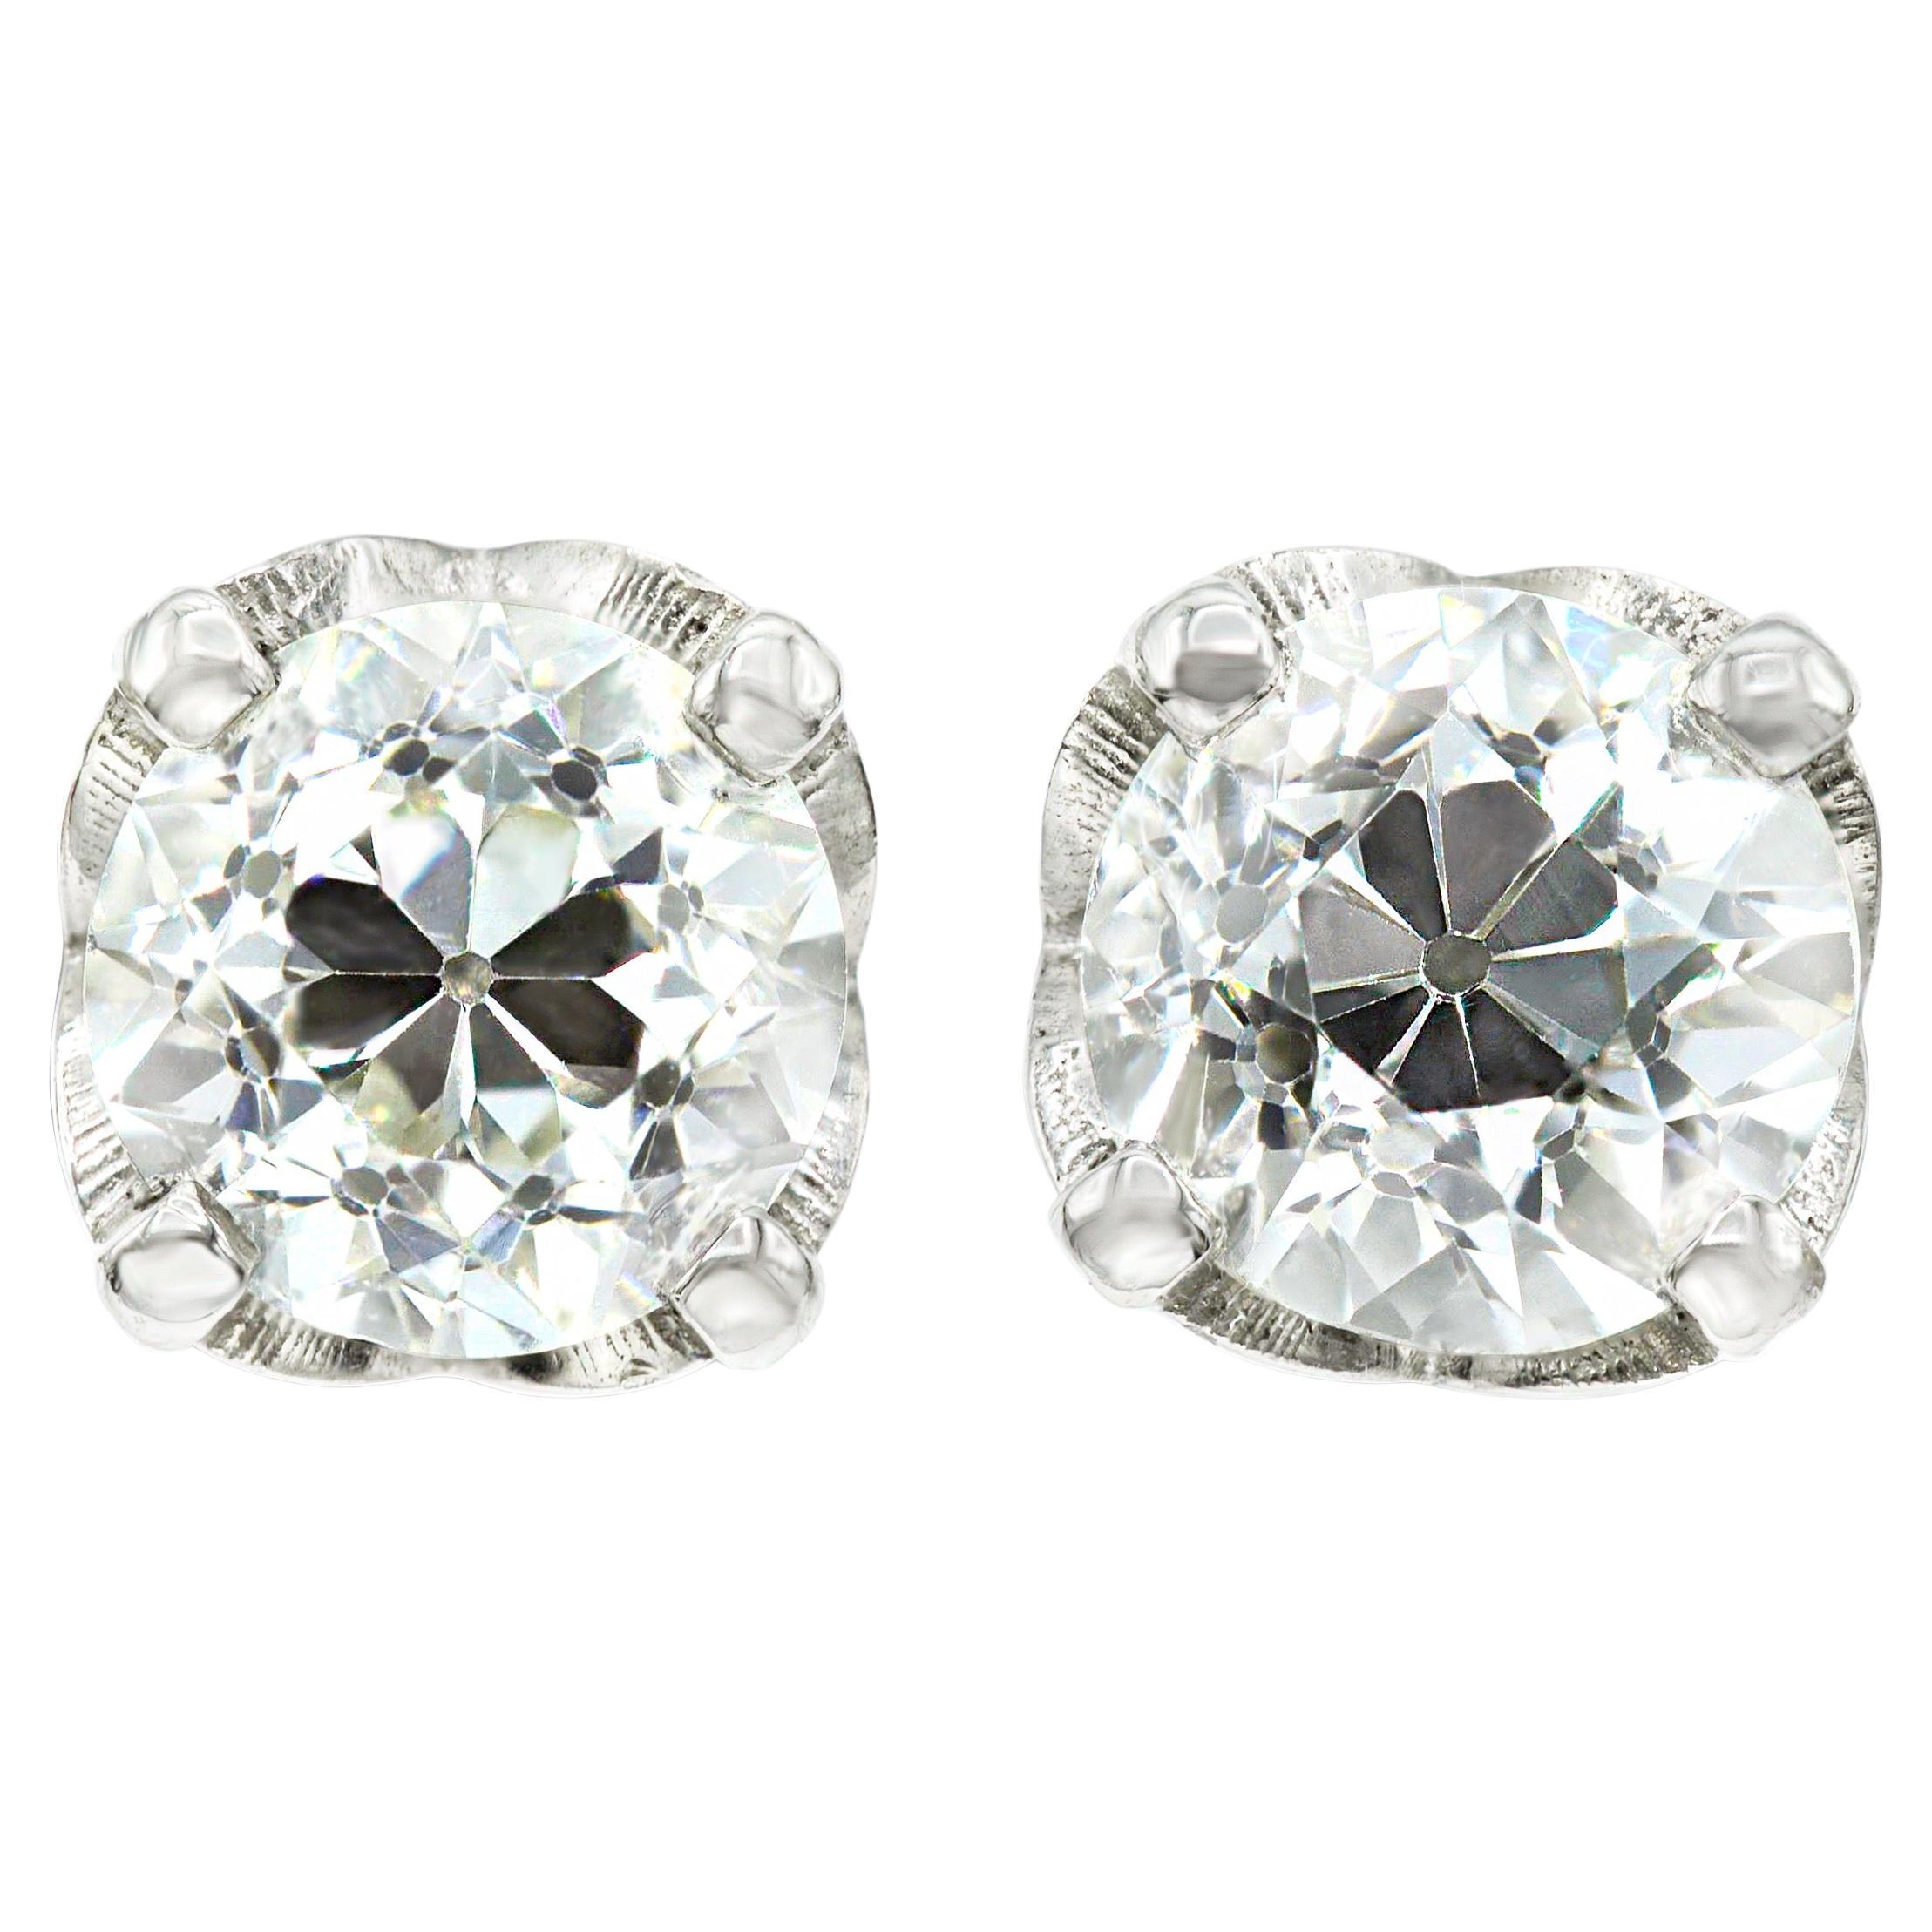 Antique 1.15 ctw Old European Cut Diamond Studs GIA Certified For Sale